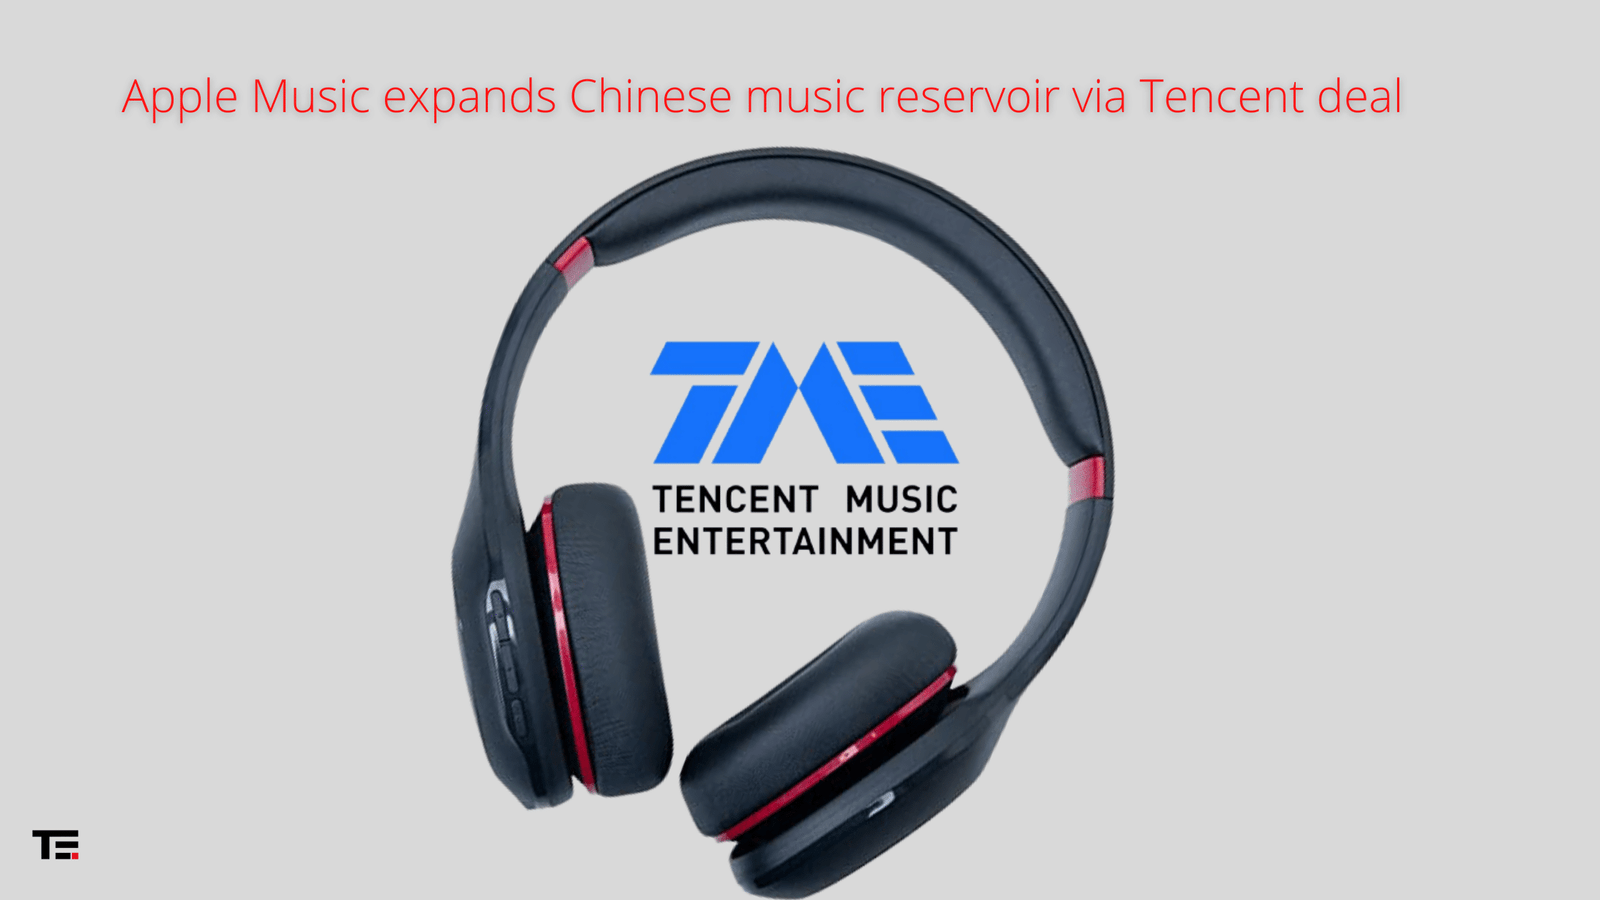 Apple Music expands Chinese music reservoir via Tencent deal